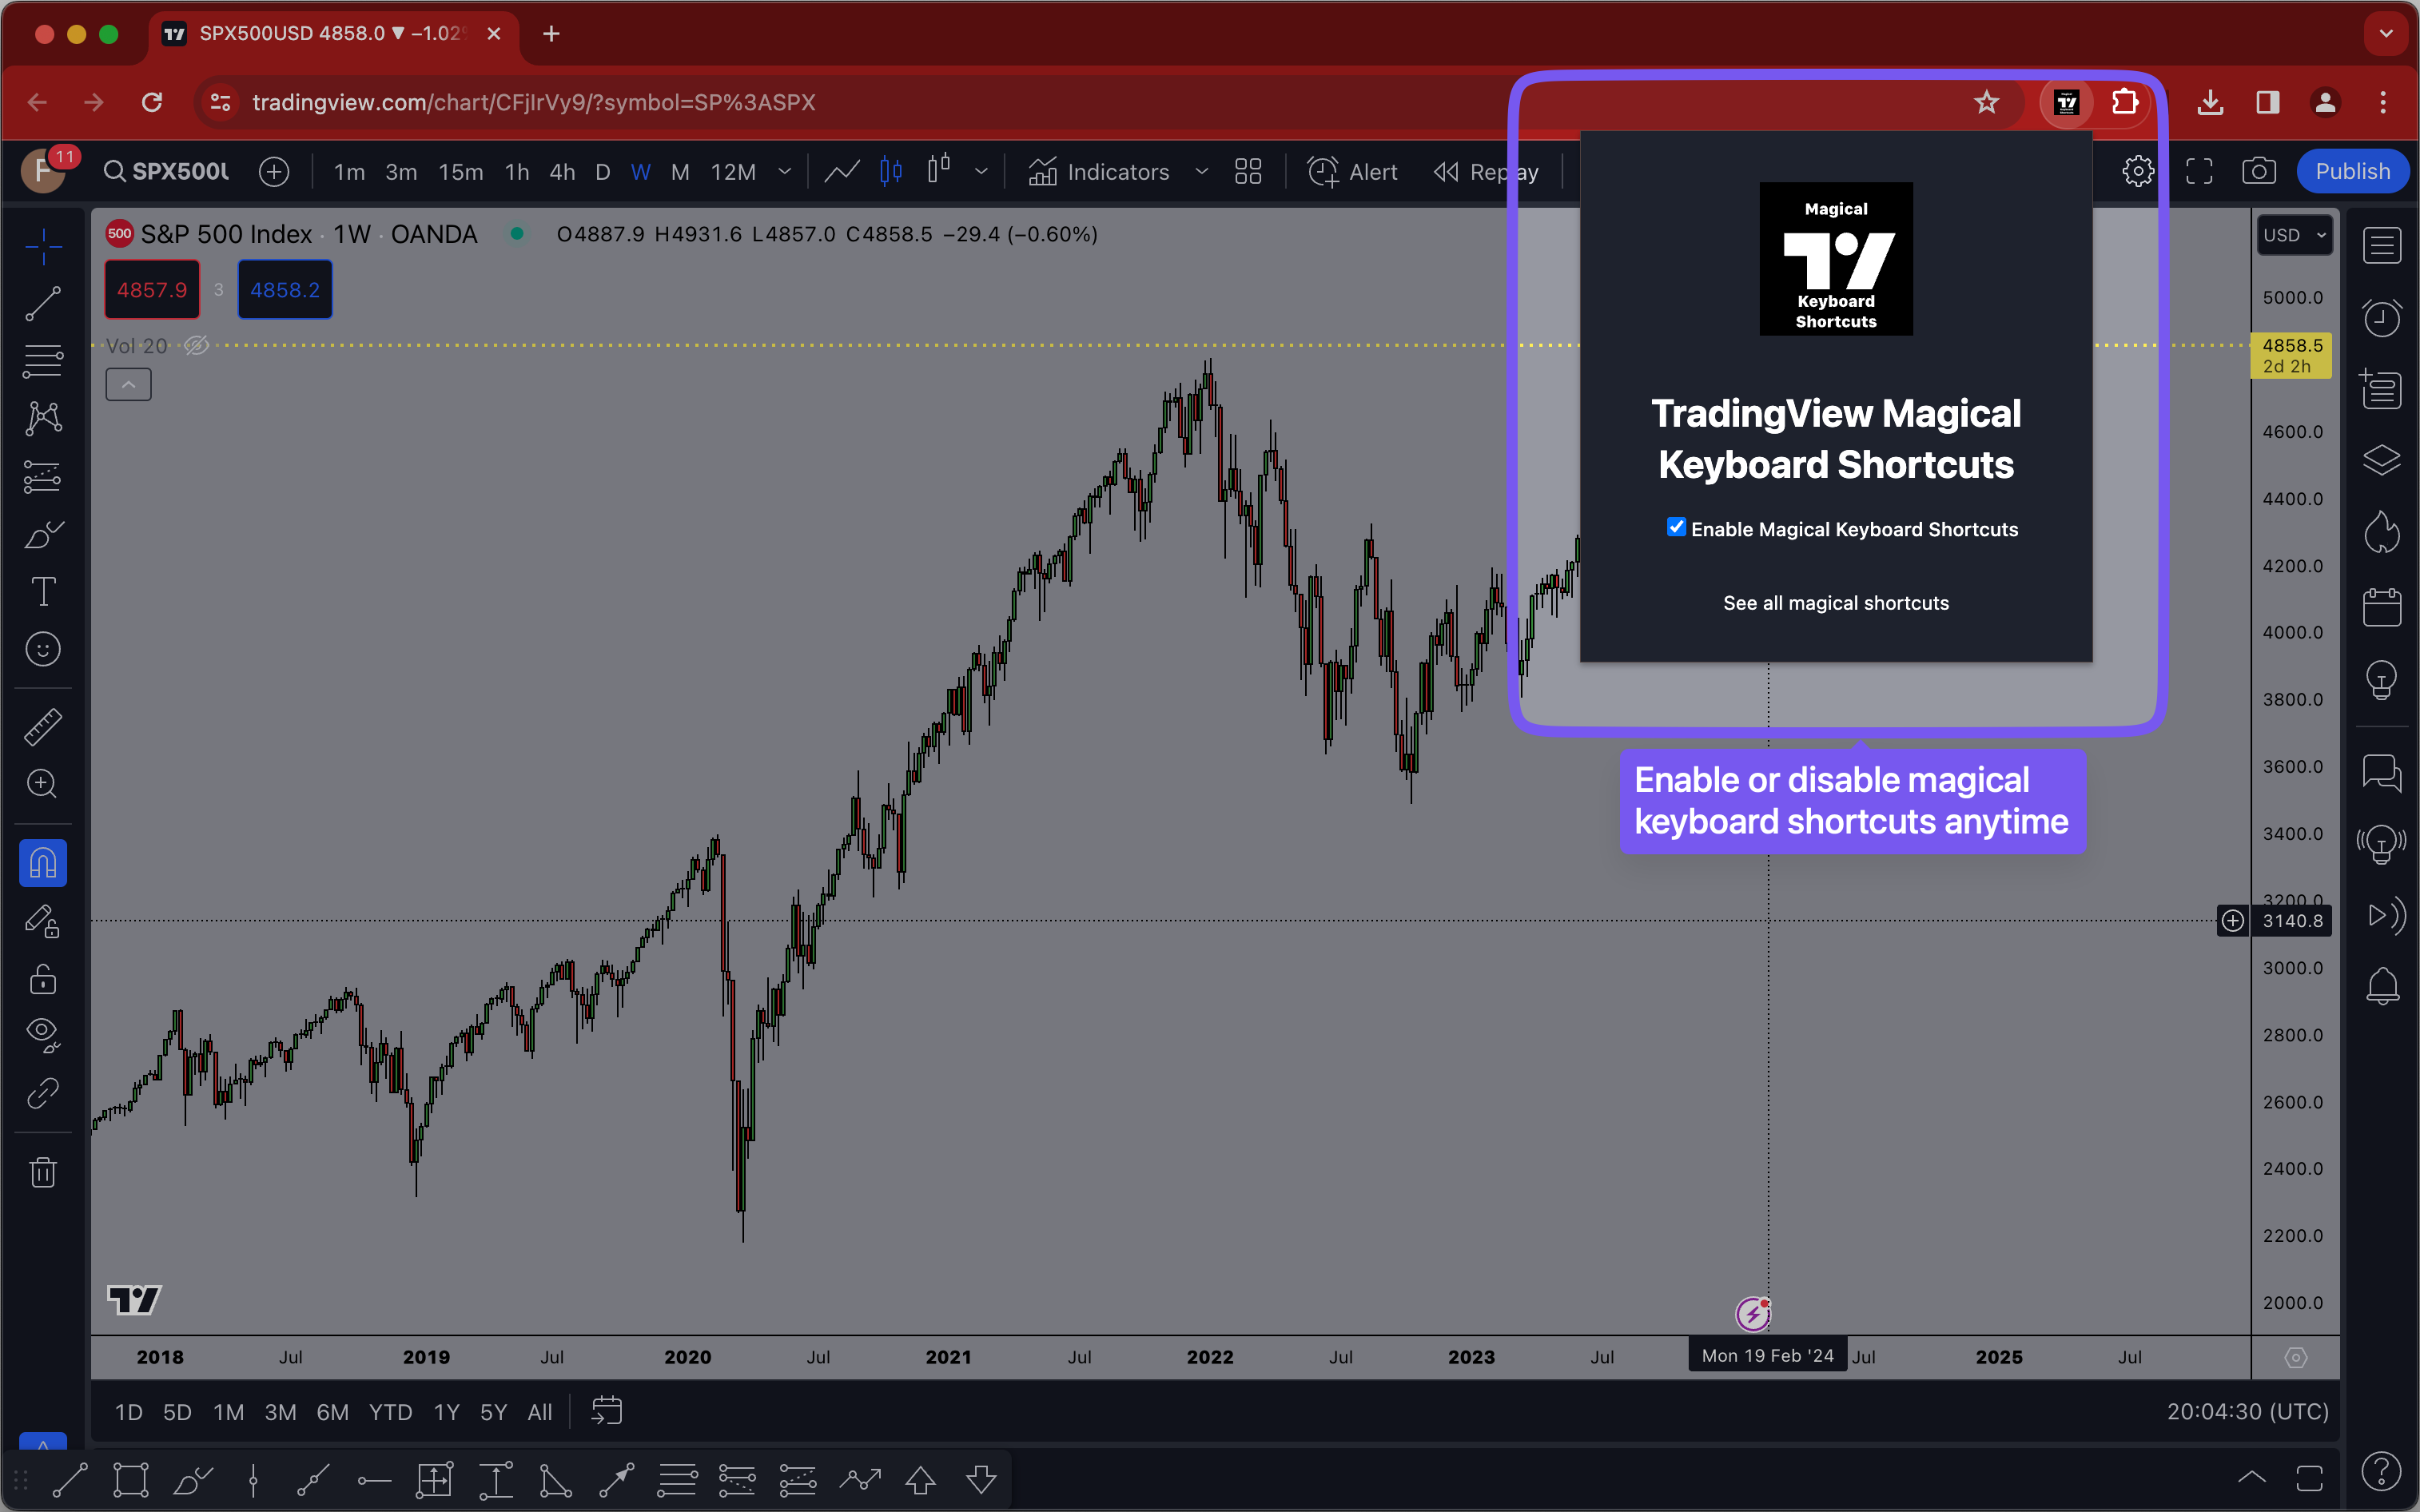 TradingView Extension in action